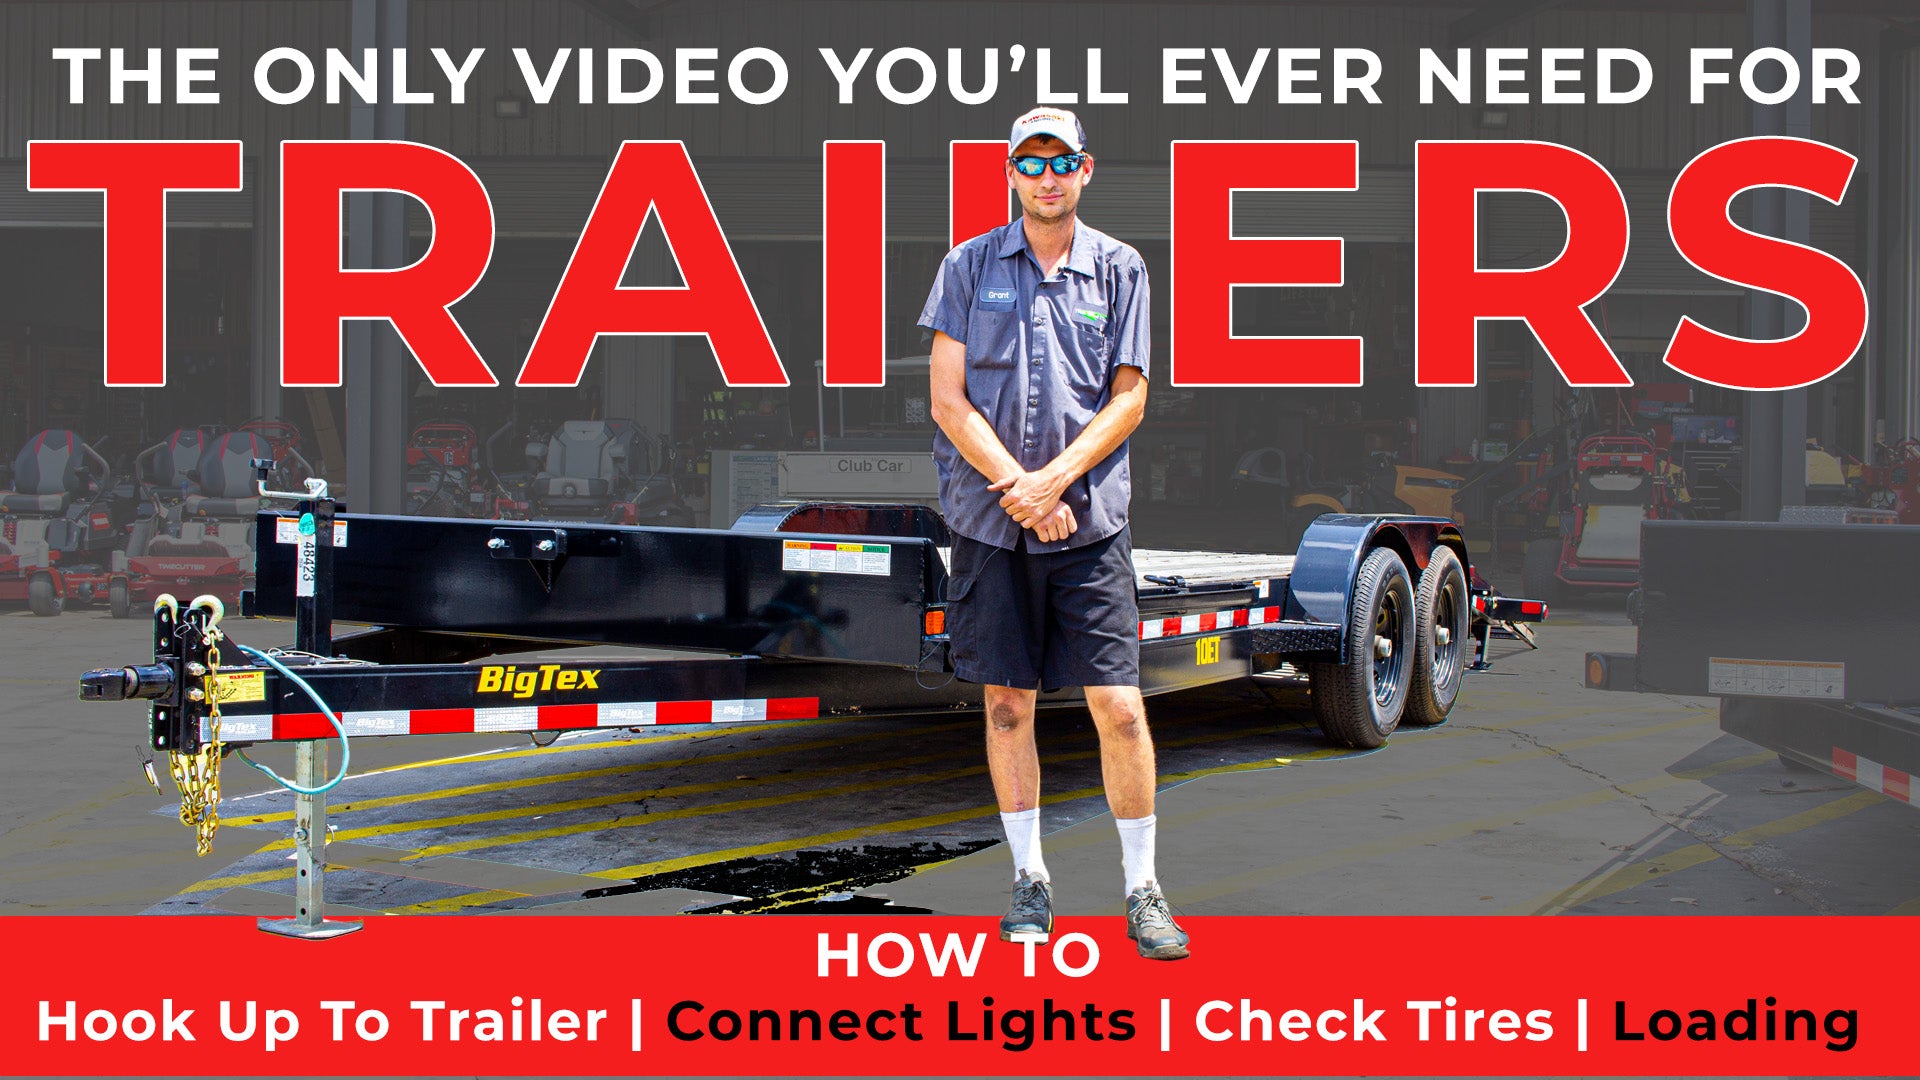 Everything you need to know about Trailers - Trailers 101 - Hookup, Lights, Tires, and Loading